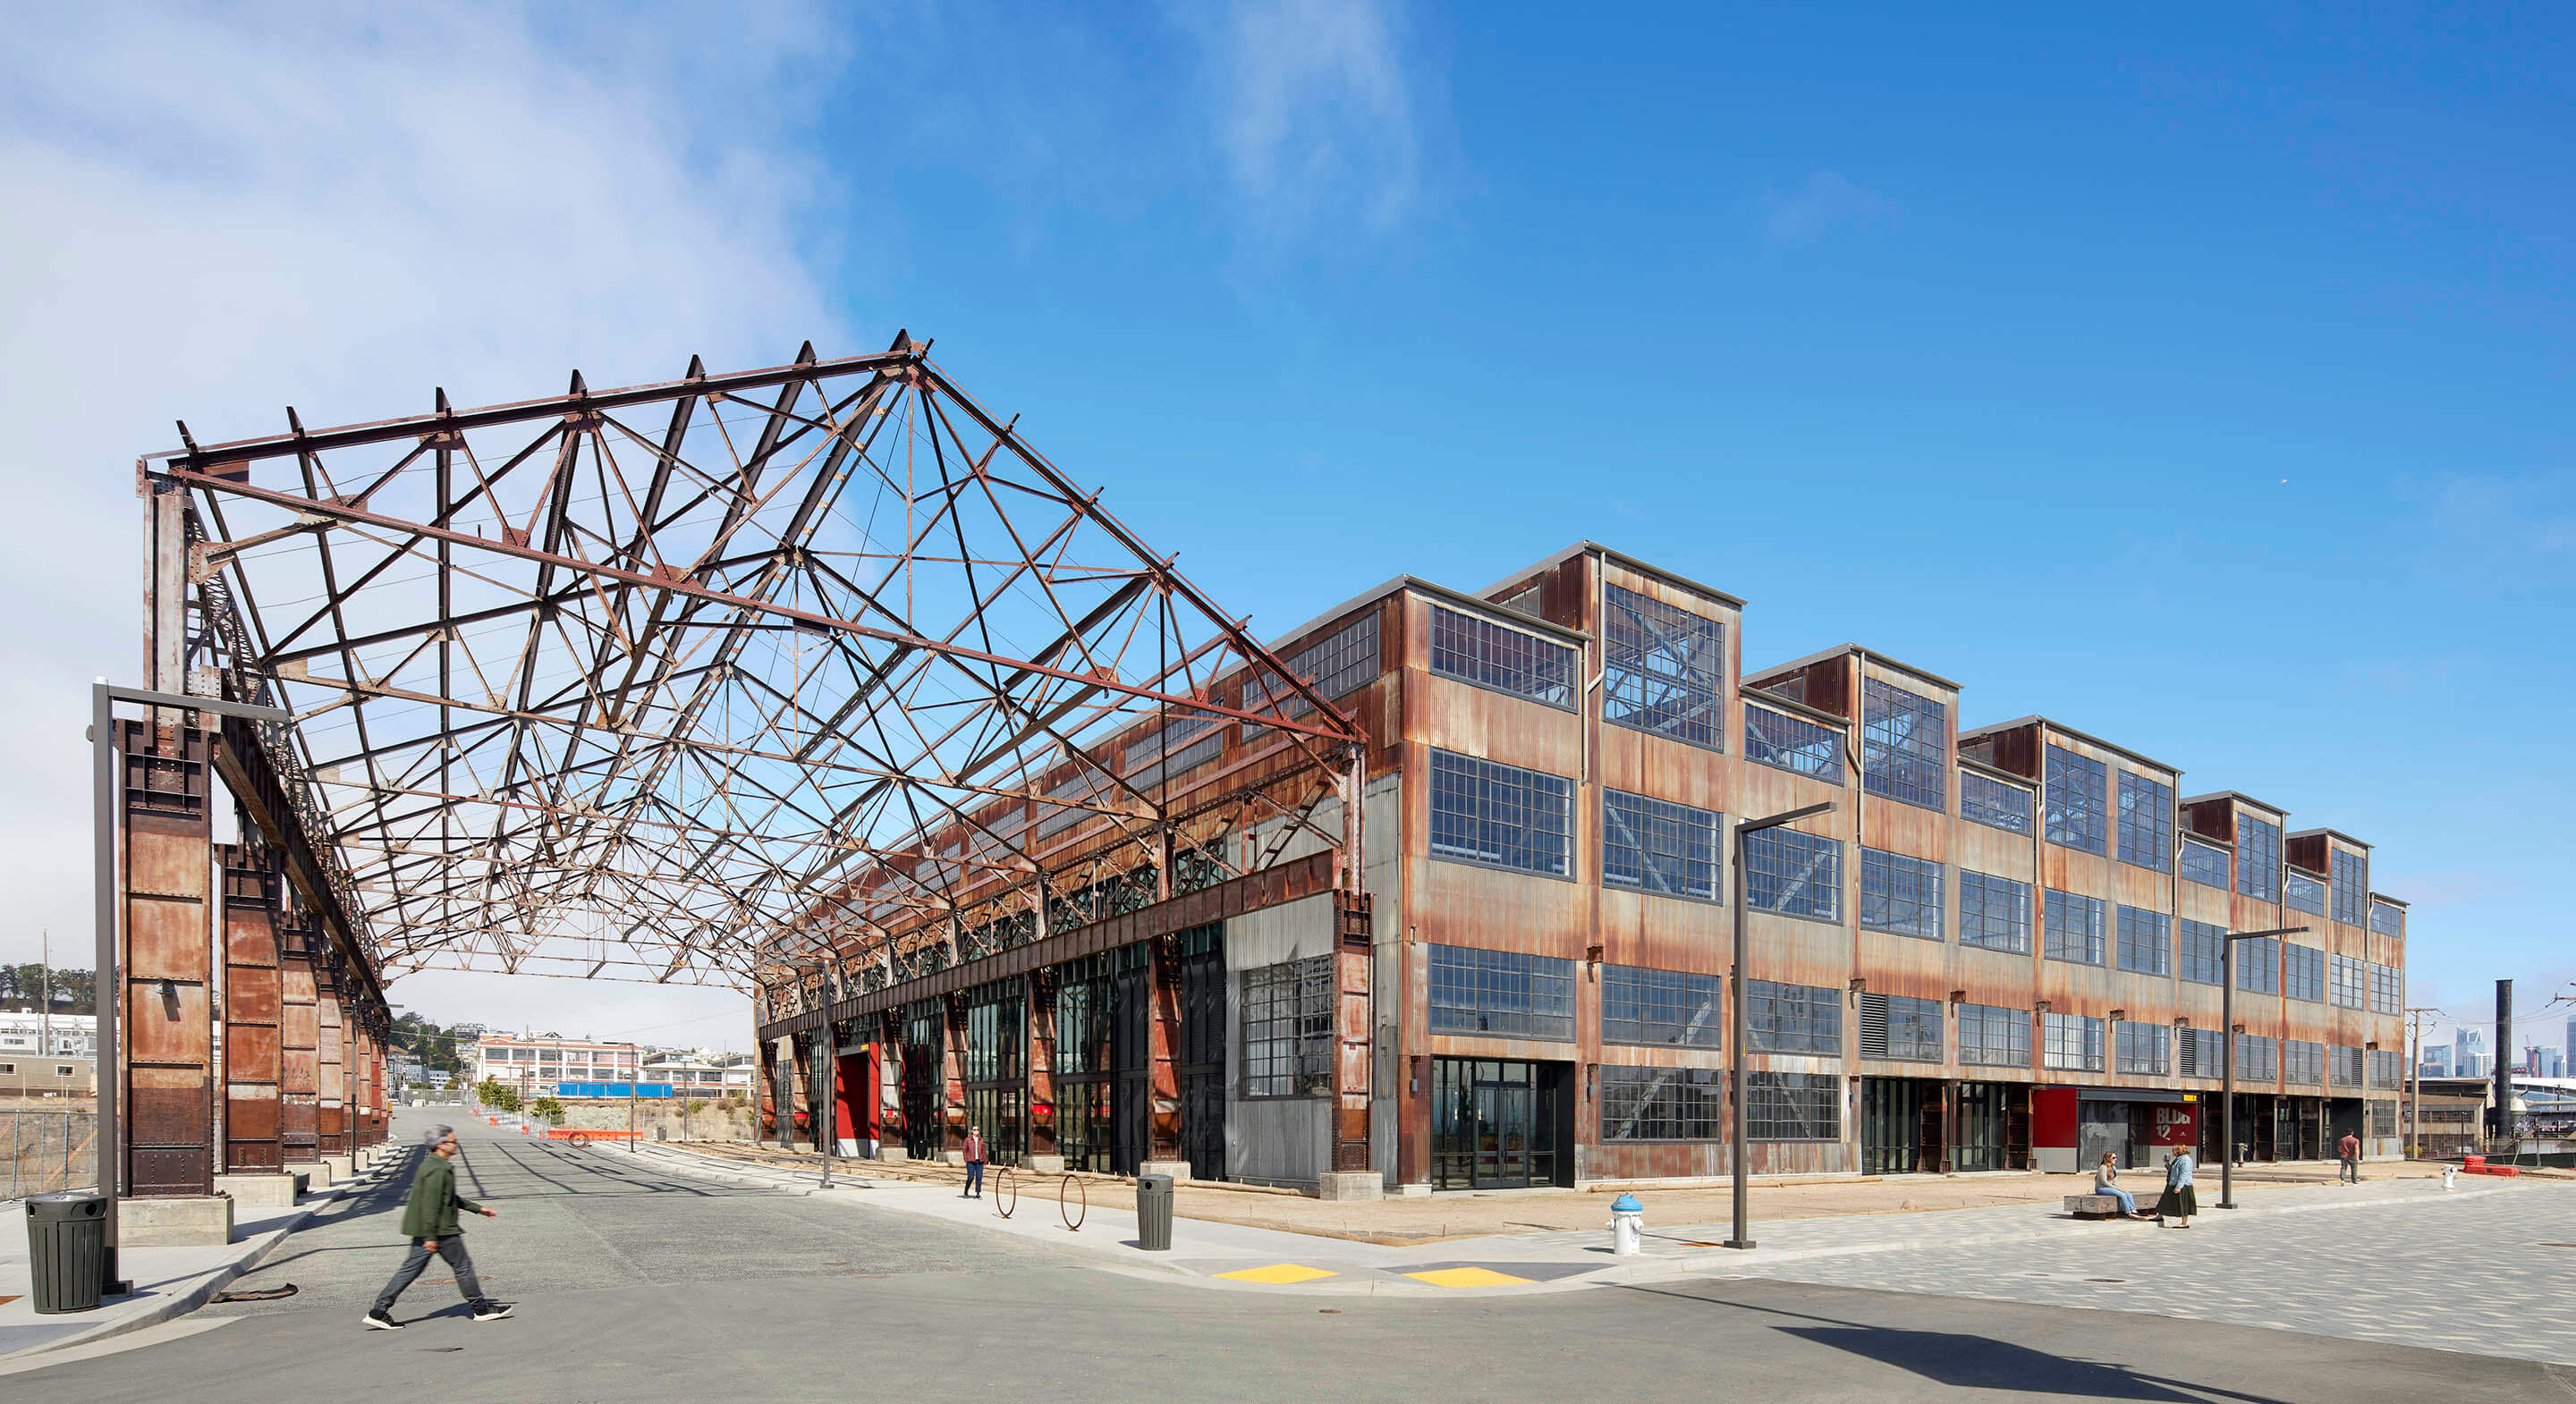 Adaptive reuse of an historic building provides new spaces for workplace and the public